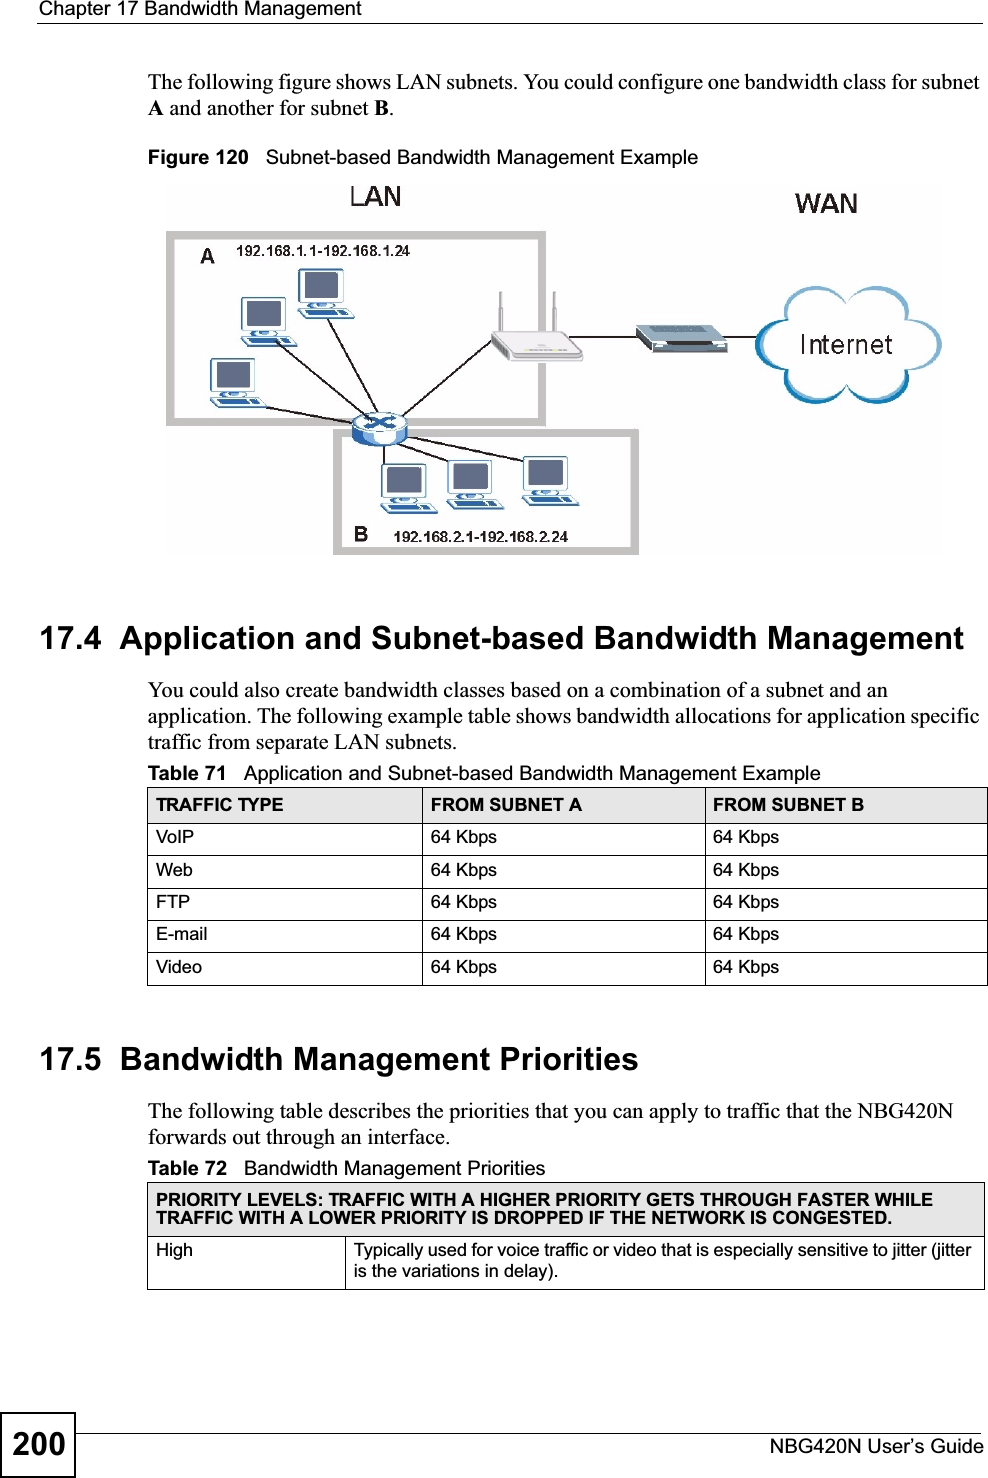 Chapter 17 Bandwidth ManagementNBG420N User’s Guide200The following figure shows LAN subnets. You could configure one bandwidth class for subnet A and another for subnet B.Figure 120   Subnet-based Bandwidth Management Example17.4  Application and Subnet-based Bandwidth ManagementYou could also create bandwidth classes based on a combination of a subnet and an application. The following example table shows bandwidth allocations for application specific traffic from separate LAN subnets.17.5  Bandwidth Management Priorities The following table describes the priorities that you can apply to traffic that the NBG420N forwards out through an interface.Table 71   Application and Subnet-based Bandwidth Management Example TRAFFIC TYPE FROM SUBNET A FROM SUBNET BVoIP 64 Kbps 64 KbpsWeb 64 Kbps 64 KbpsFTP 64 Kbps 64 KbpsE-mail 64 Kbps 64 KbpsVideo 64 Kbps 64 KbpsTable 72   Bandwidth Management PrioritiesPRIORITY LEVELS: TRAFFIC WITH A HIGHER PRIORITY GETS THROUGH FASTER WHILE TRAFFIC WITH A LOWER PRIORITY IS DROPPED IF THE NETWORK IS CONGESTED.High Typically used for voice traffic or video that is especially sensitive to jitter (jitter is the variations in delay).